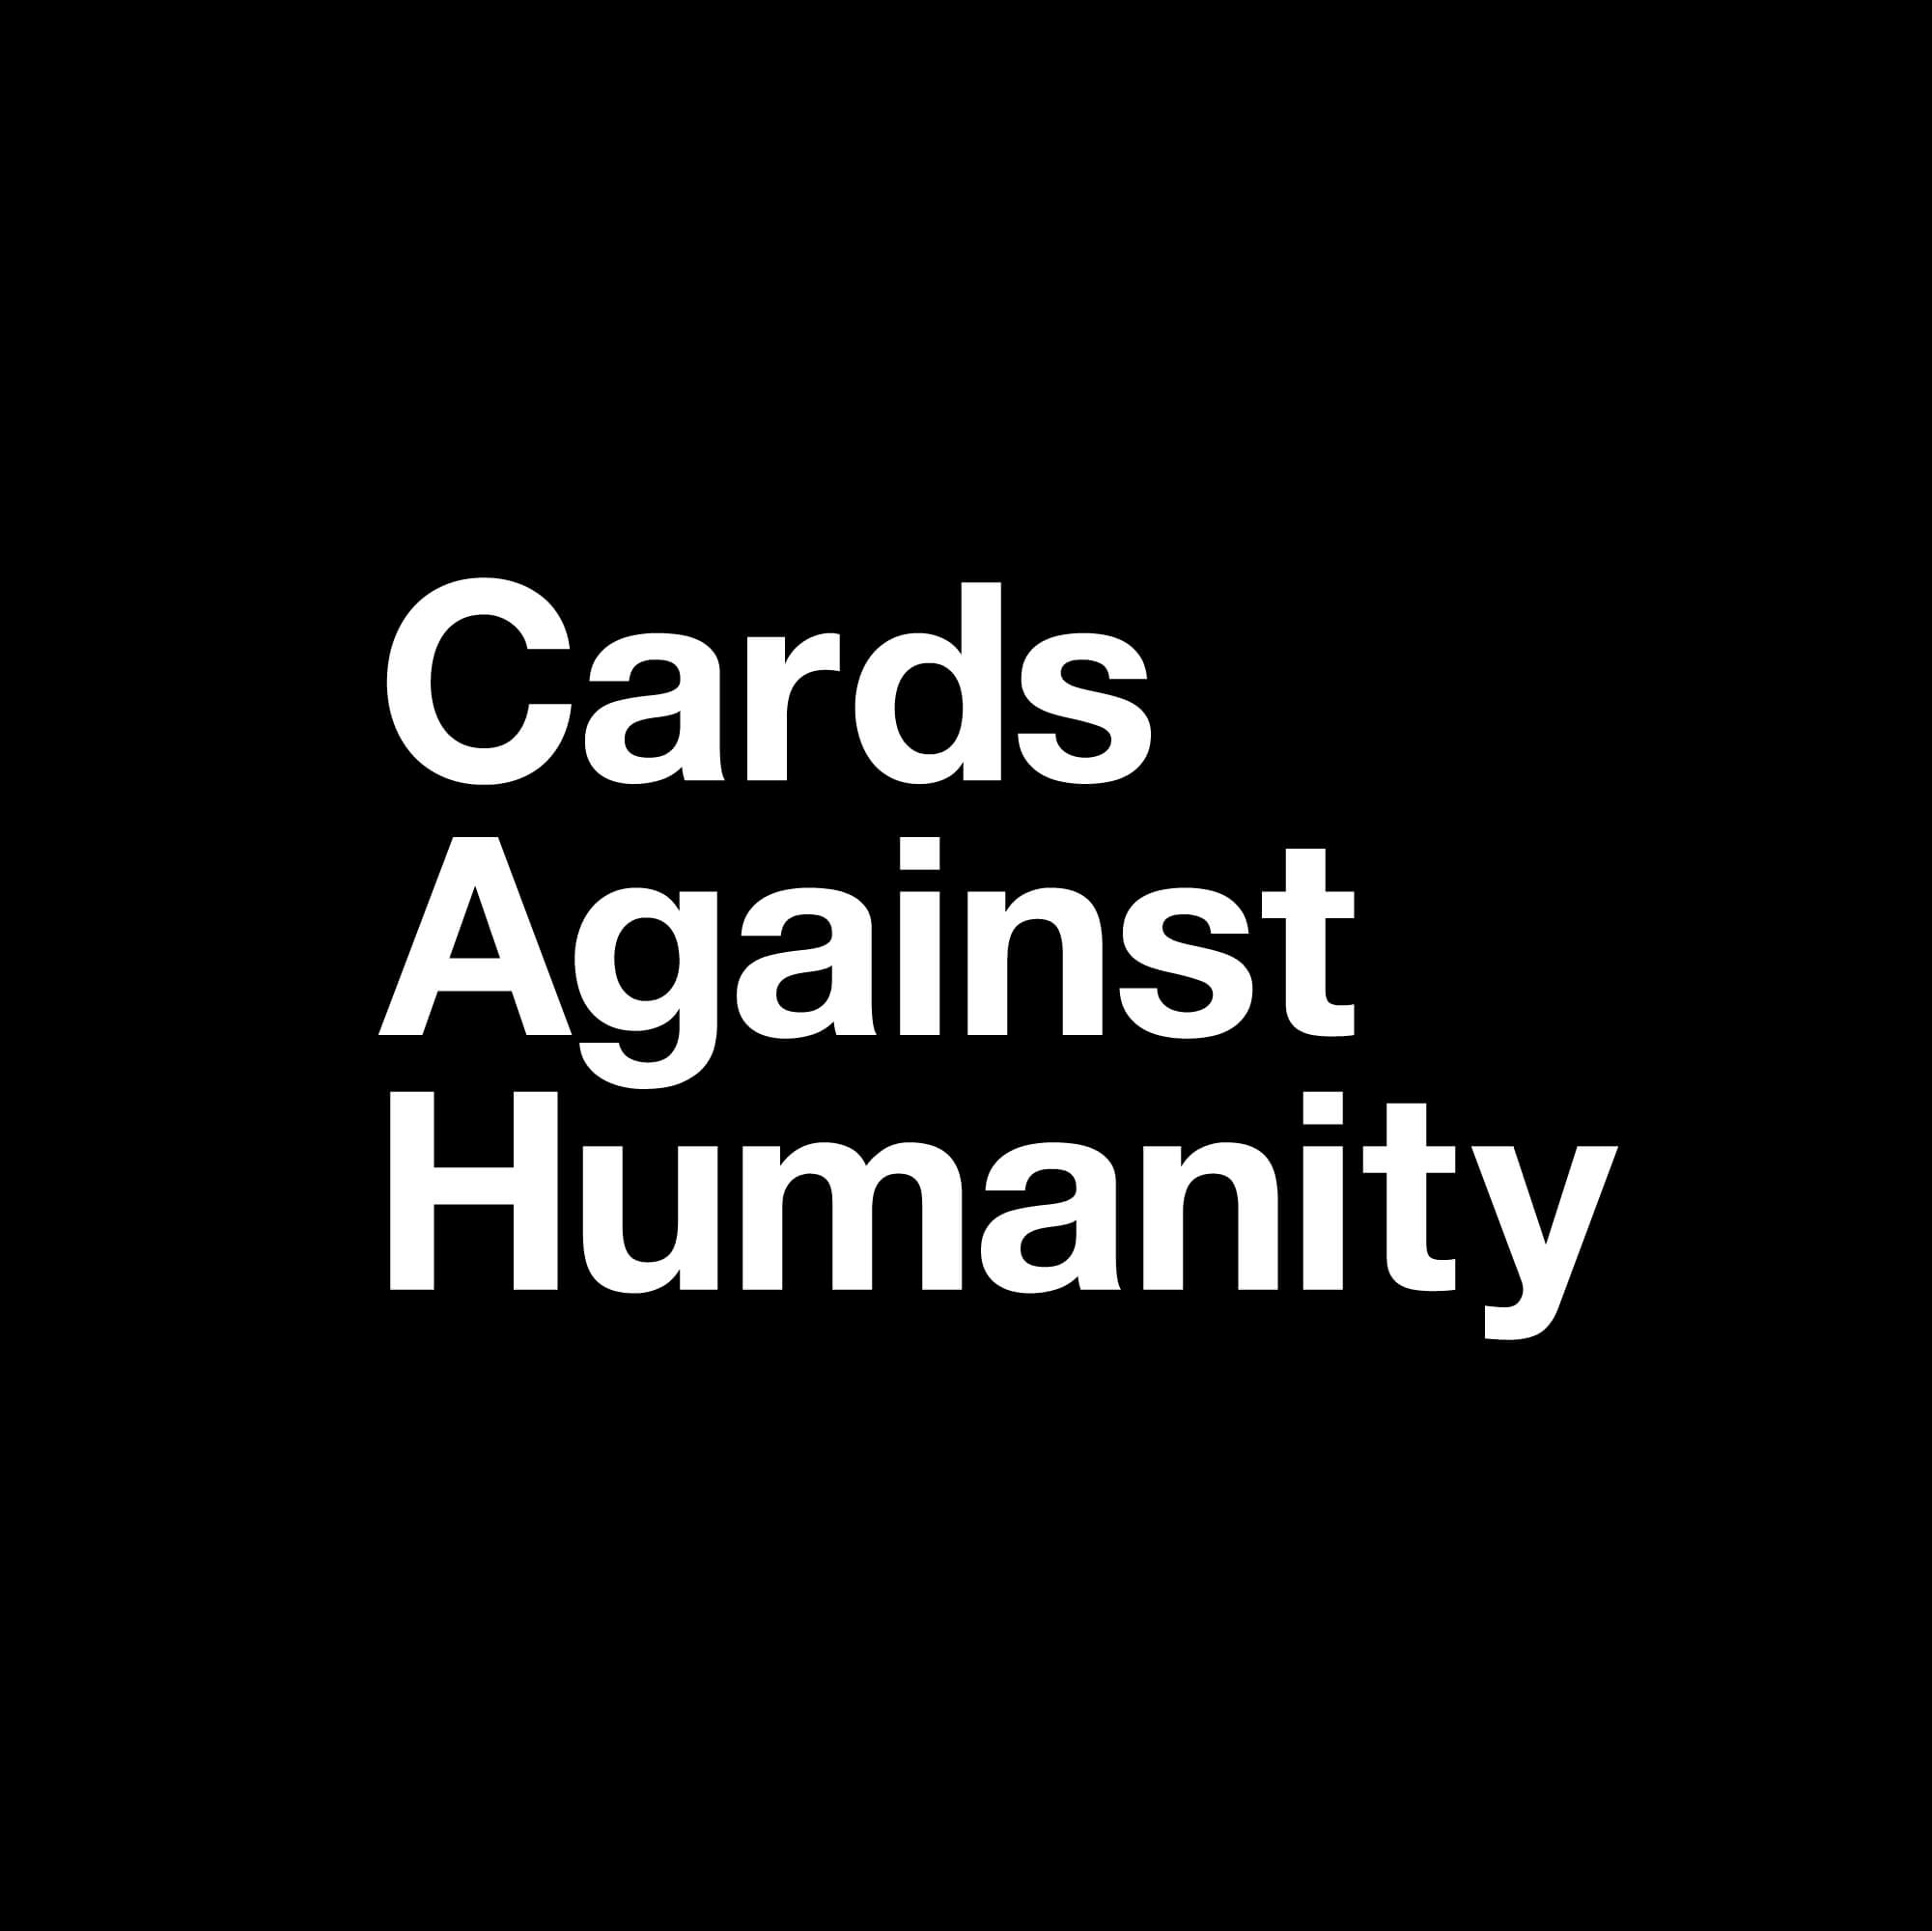 Cards Against Humanity - Wikipedia Intended For Cards Against Humanity Template